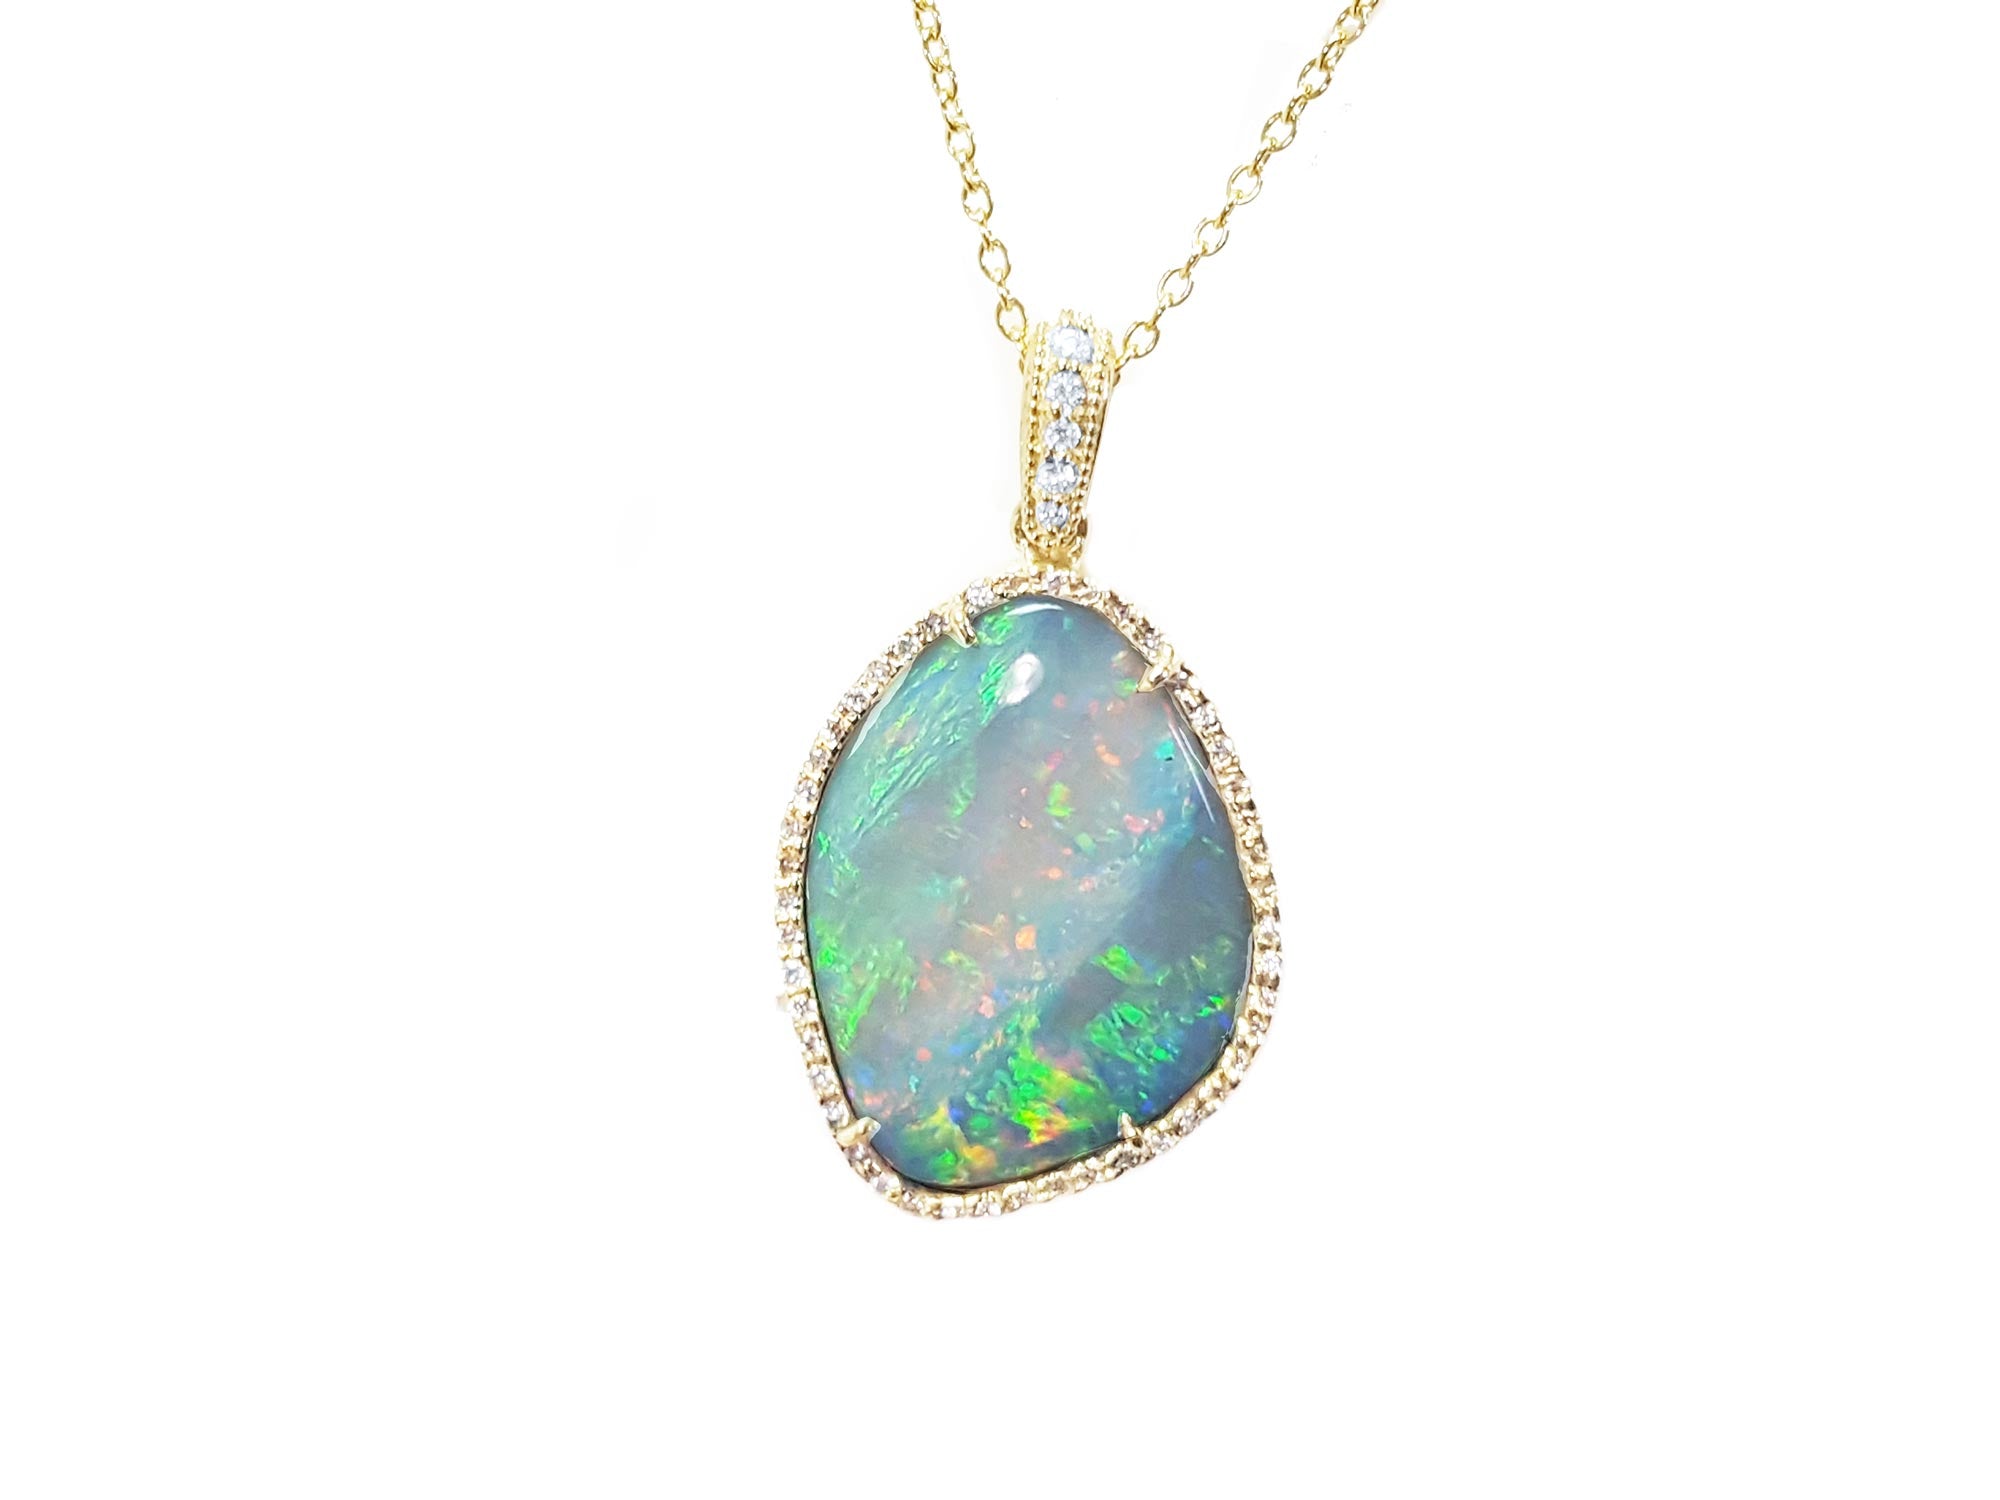 Solid opal pendant necklace